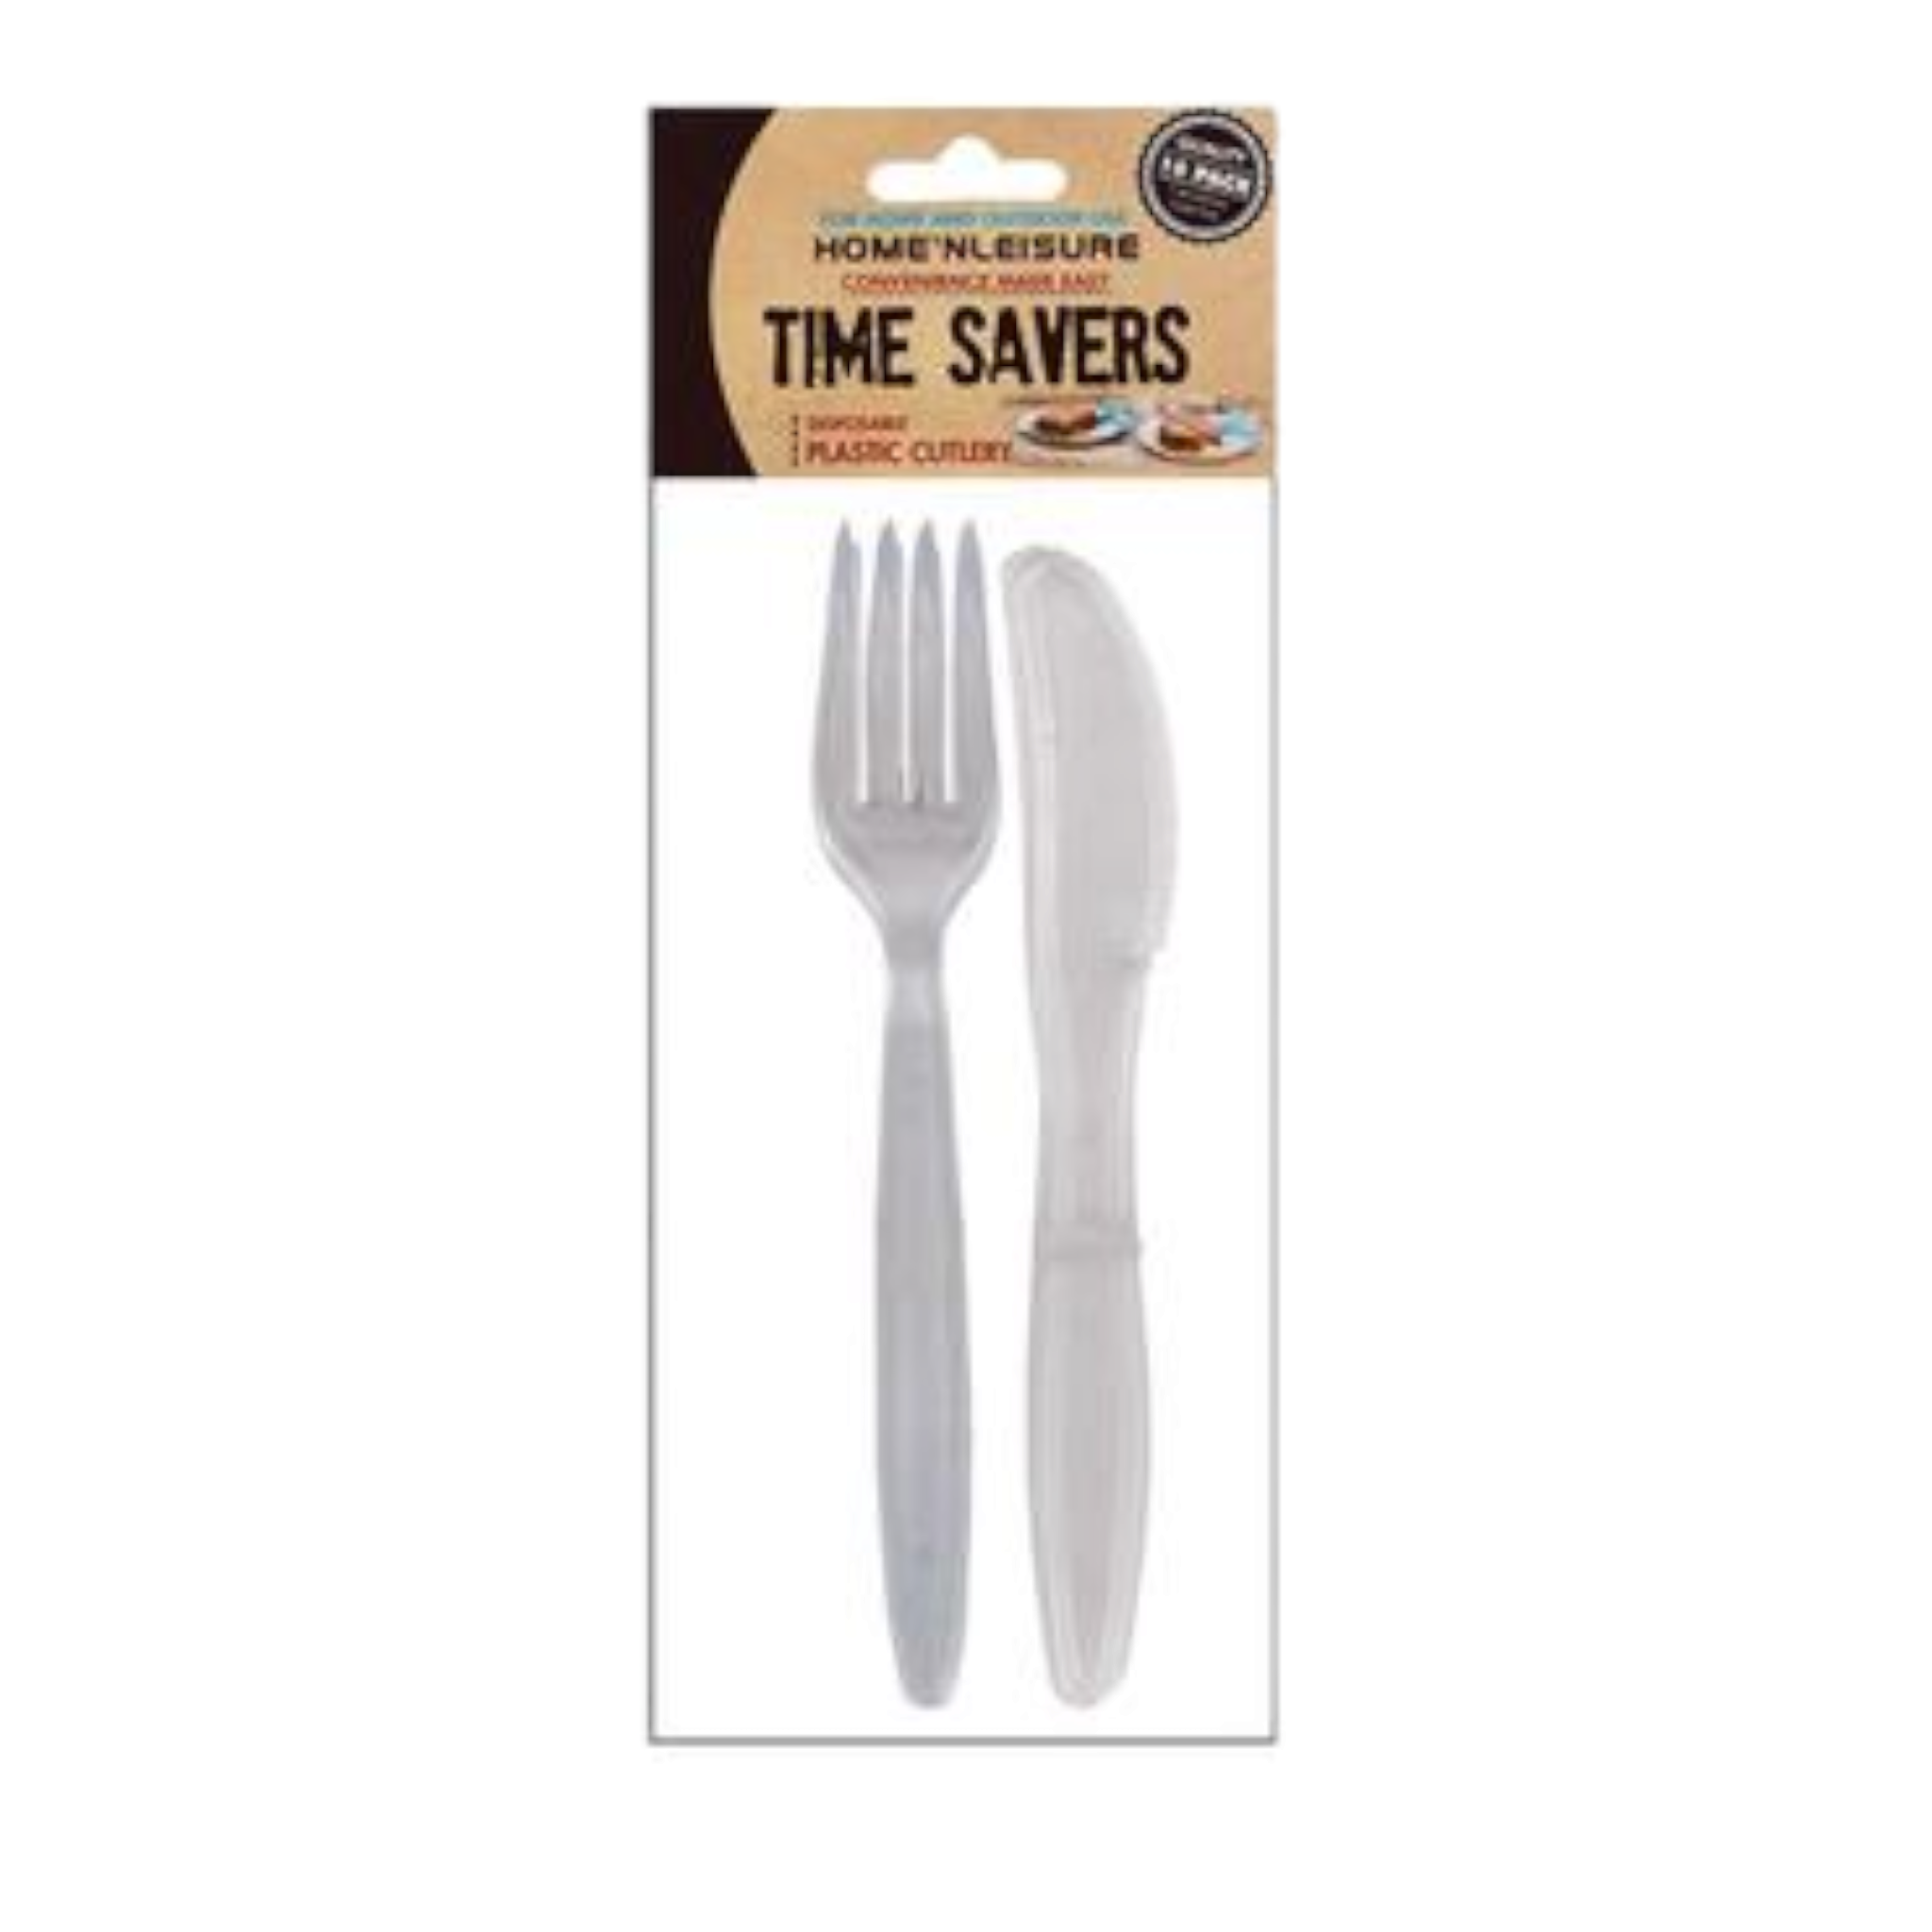 Time Savers Disposable Picnic Cutlery 5xKnives 5xFork 10pc Clear or White